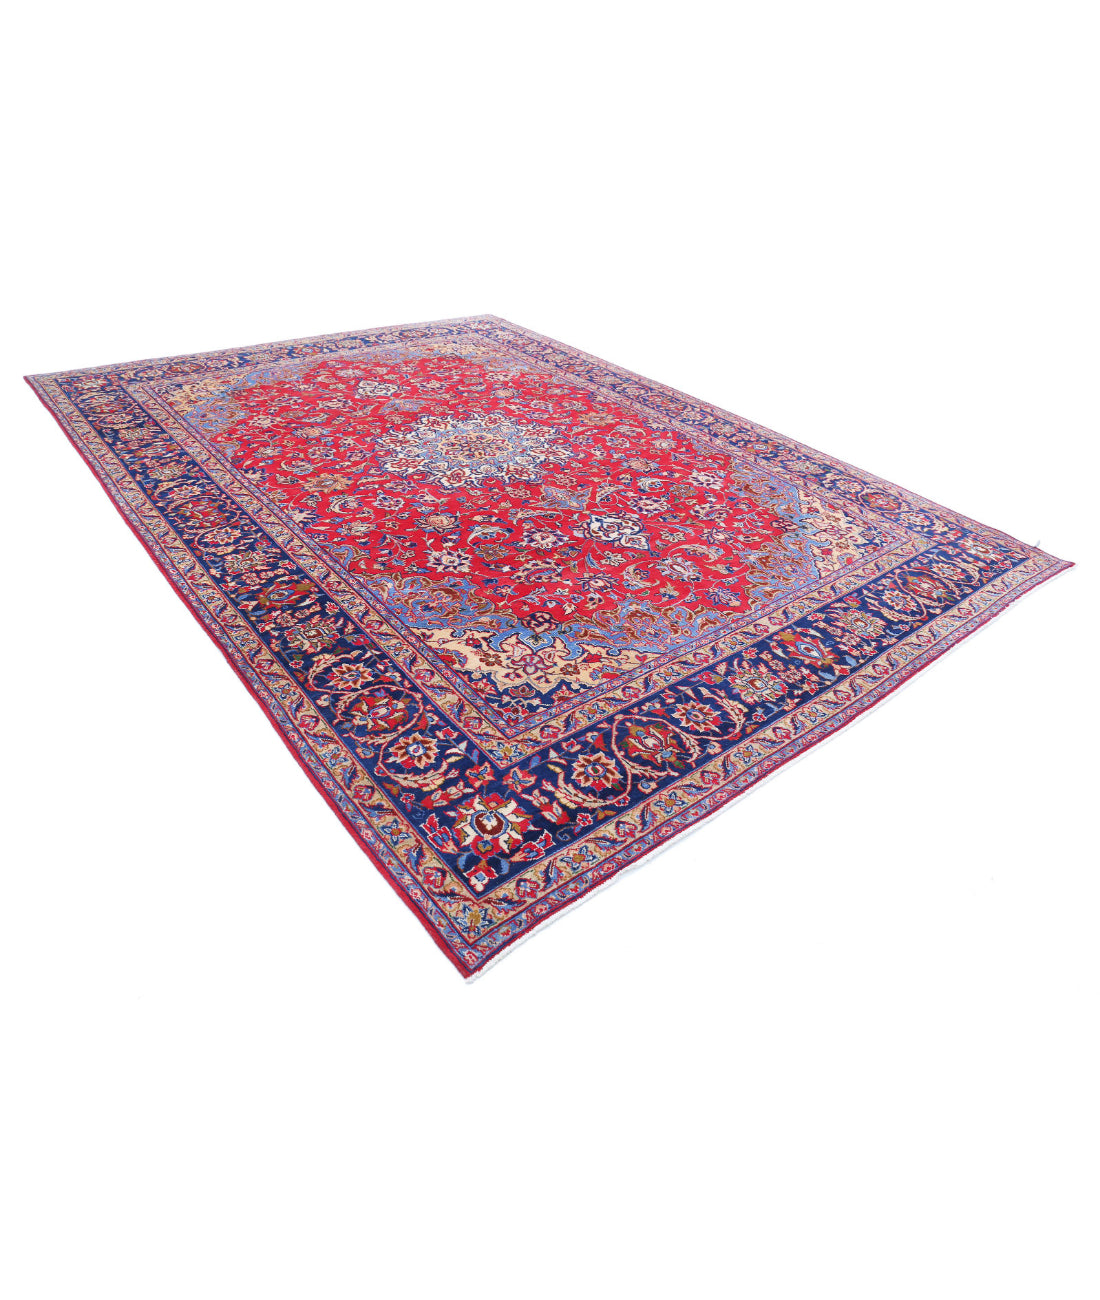 Hand Knotted Persian Mahal Wool Rug - 9'6'' x 13'2'' 9'6'' x 13'2'' (285 X 395) / Red / Blue